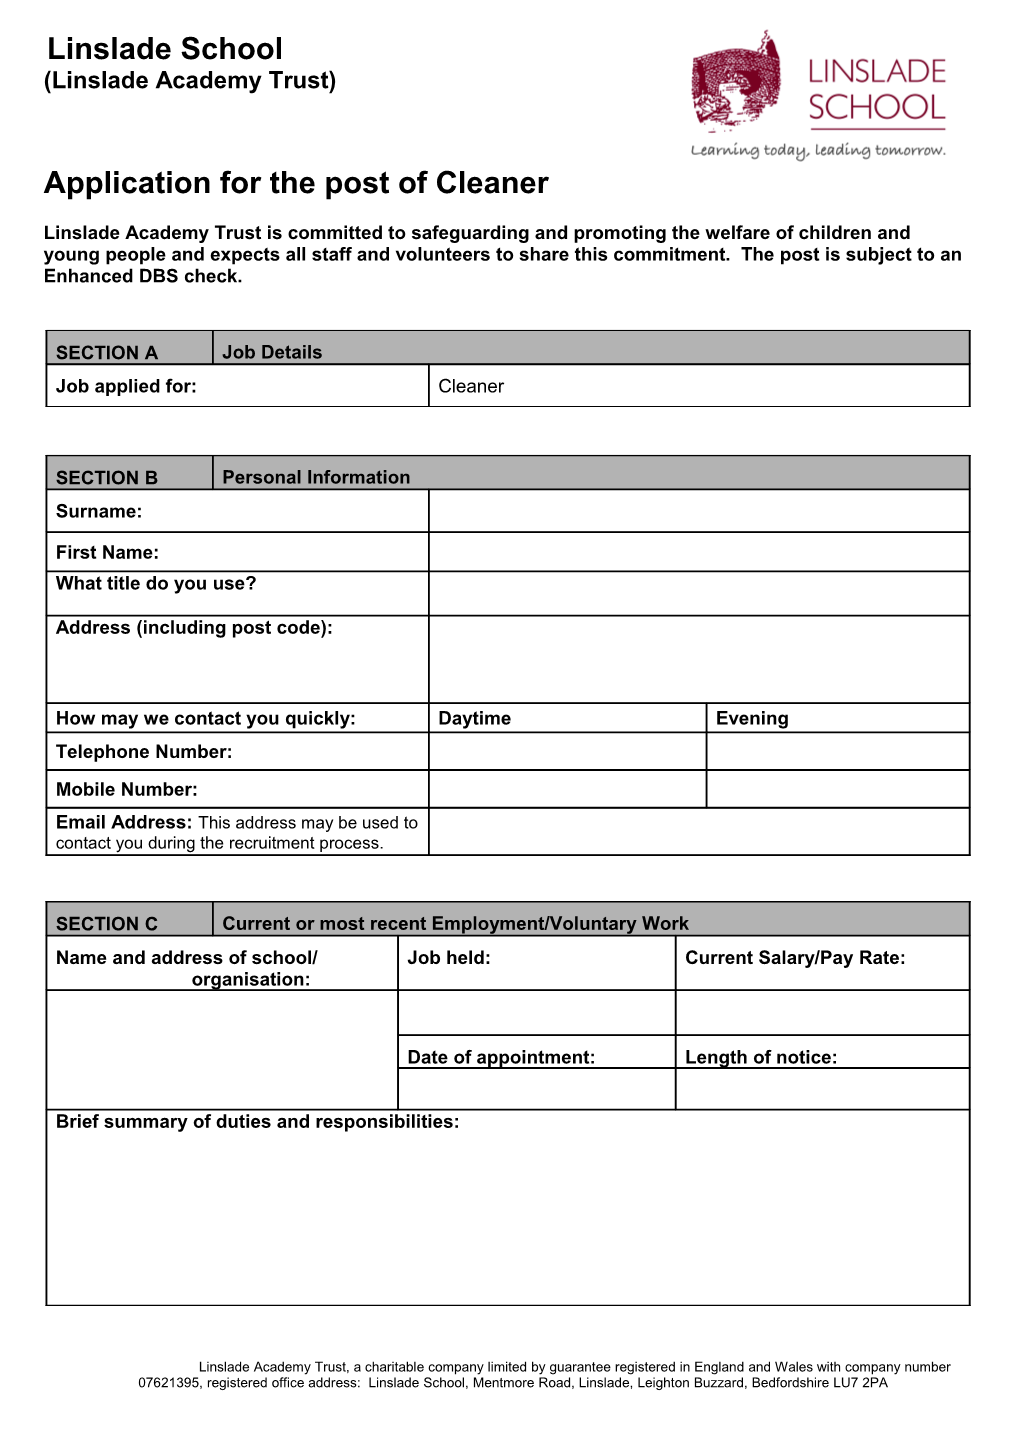 Application for the Post of Cleaner